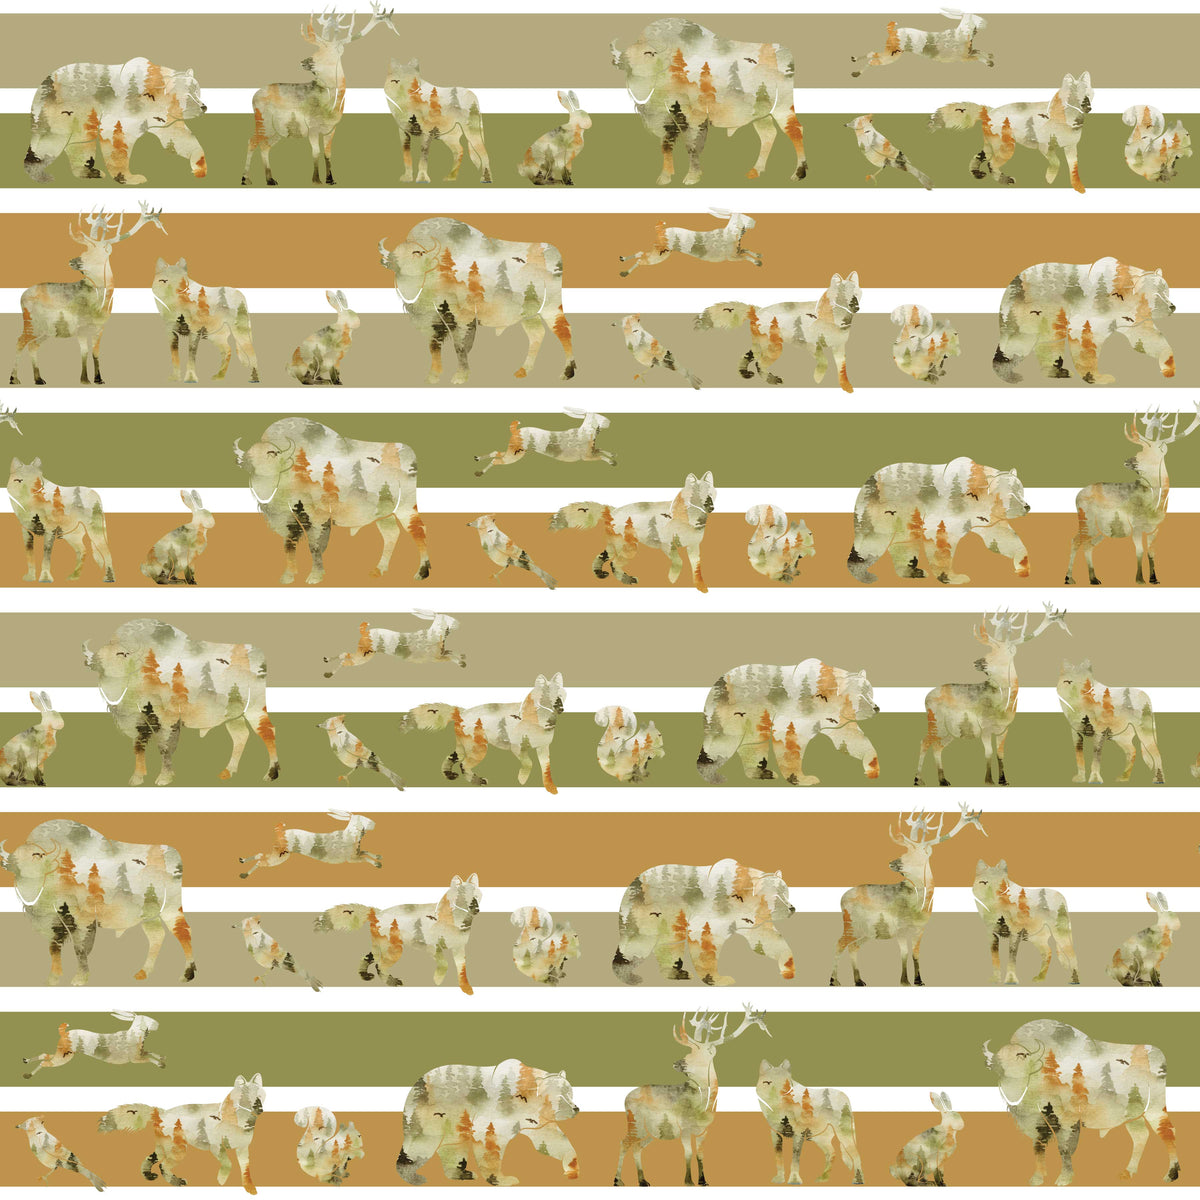 Forest Animals Wrapping Paper